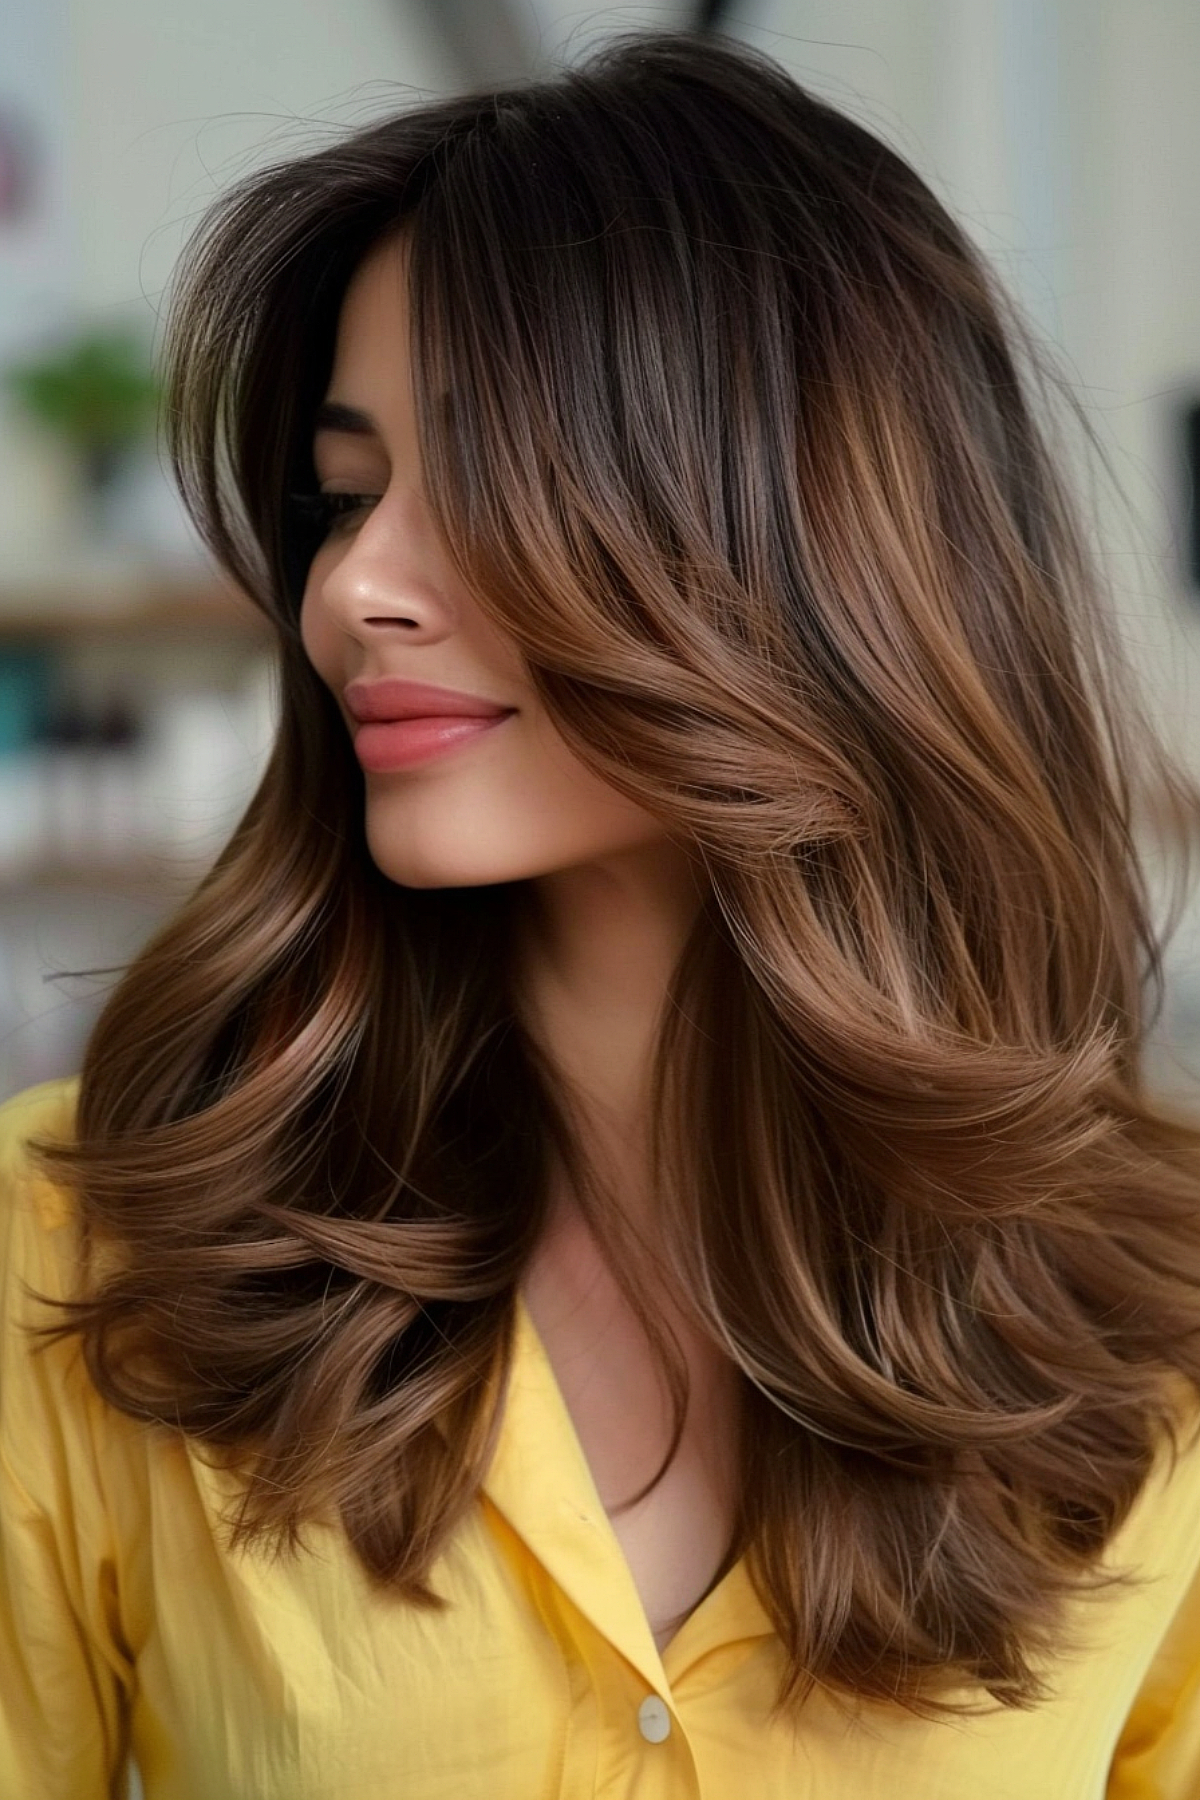 A layered long haircut with curtain bangs that frames the face is perfect for creating a romantic look on an elongated face.